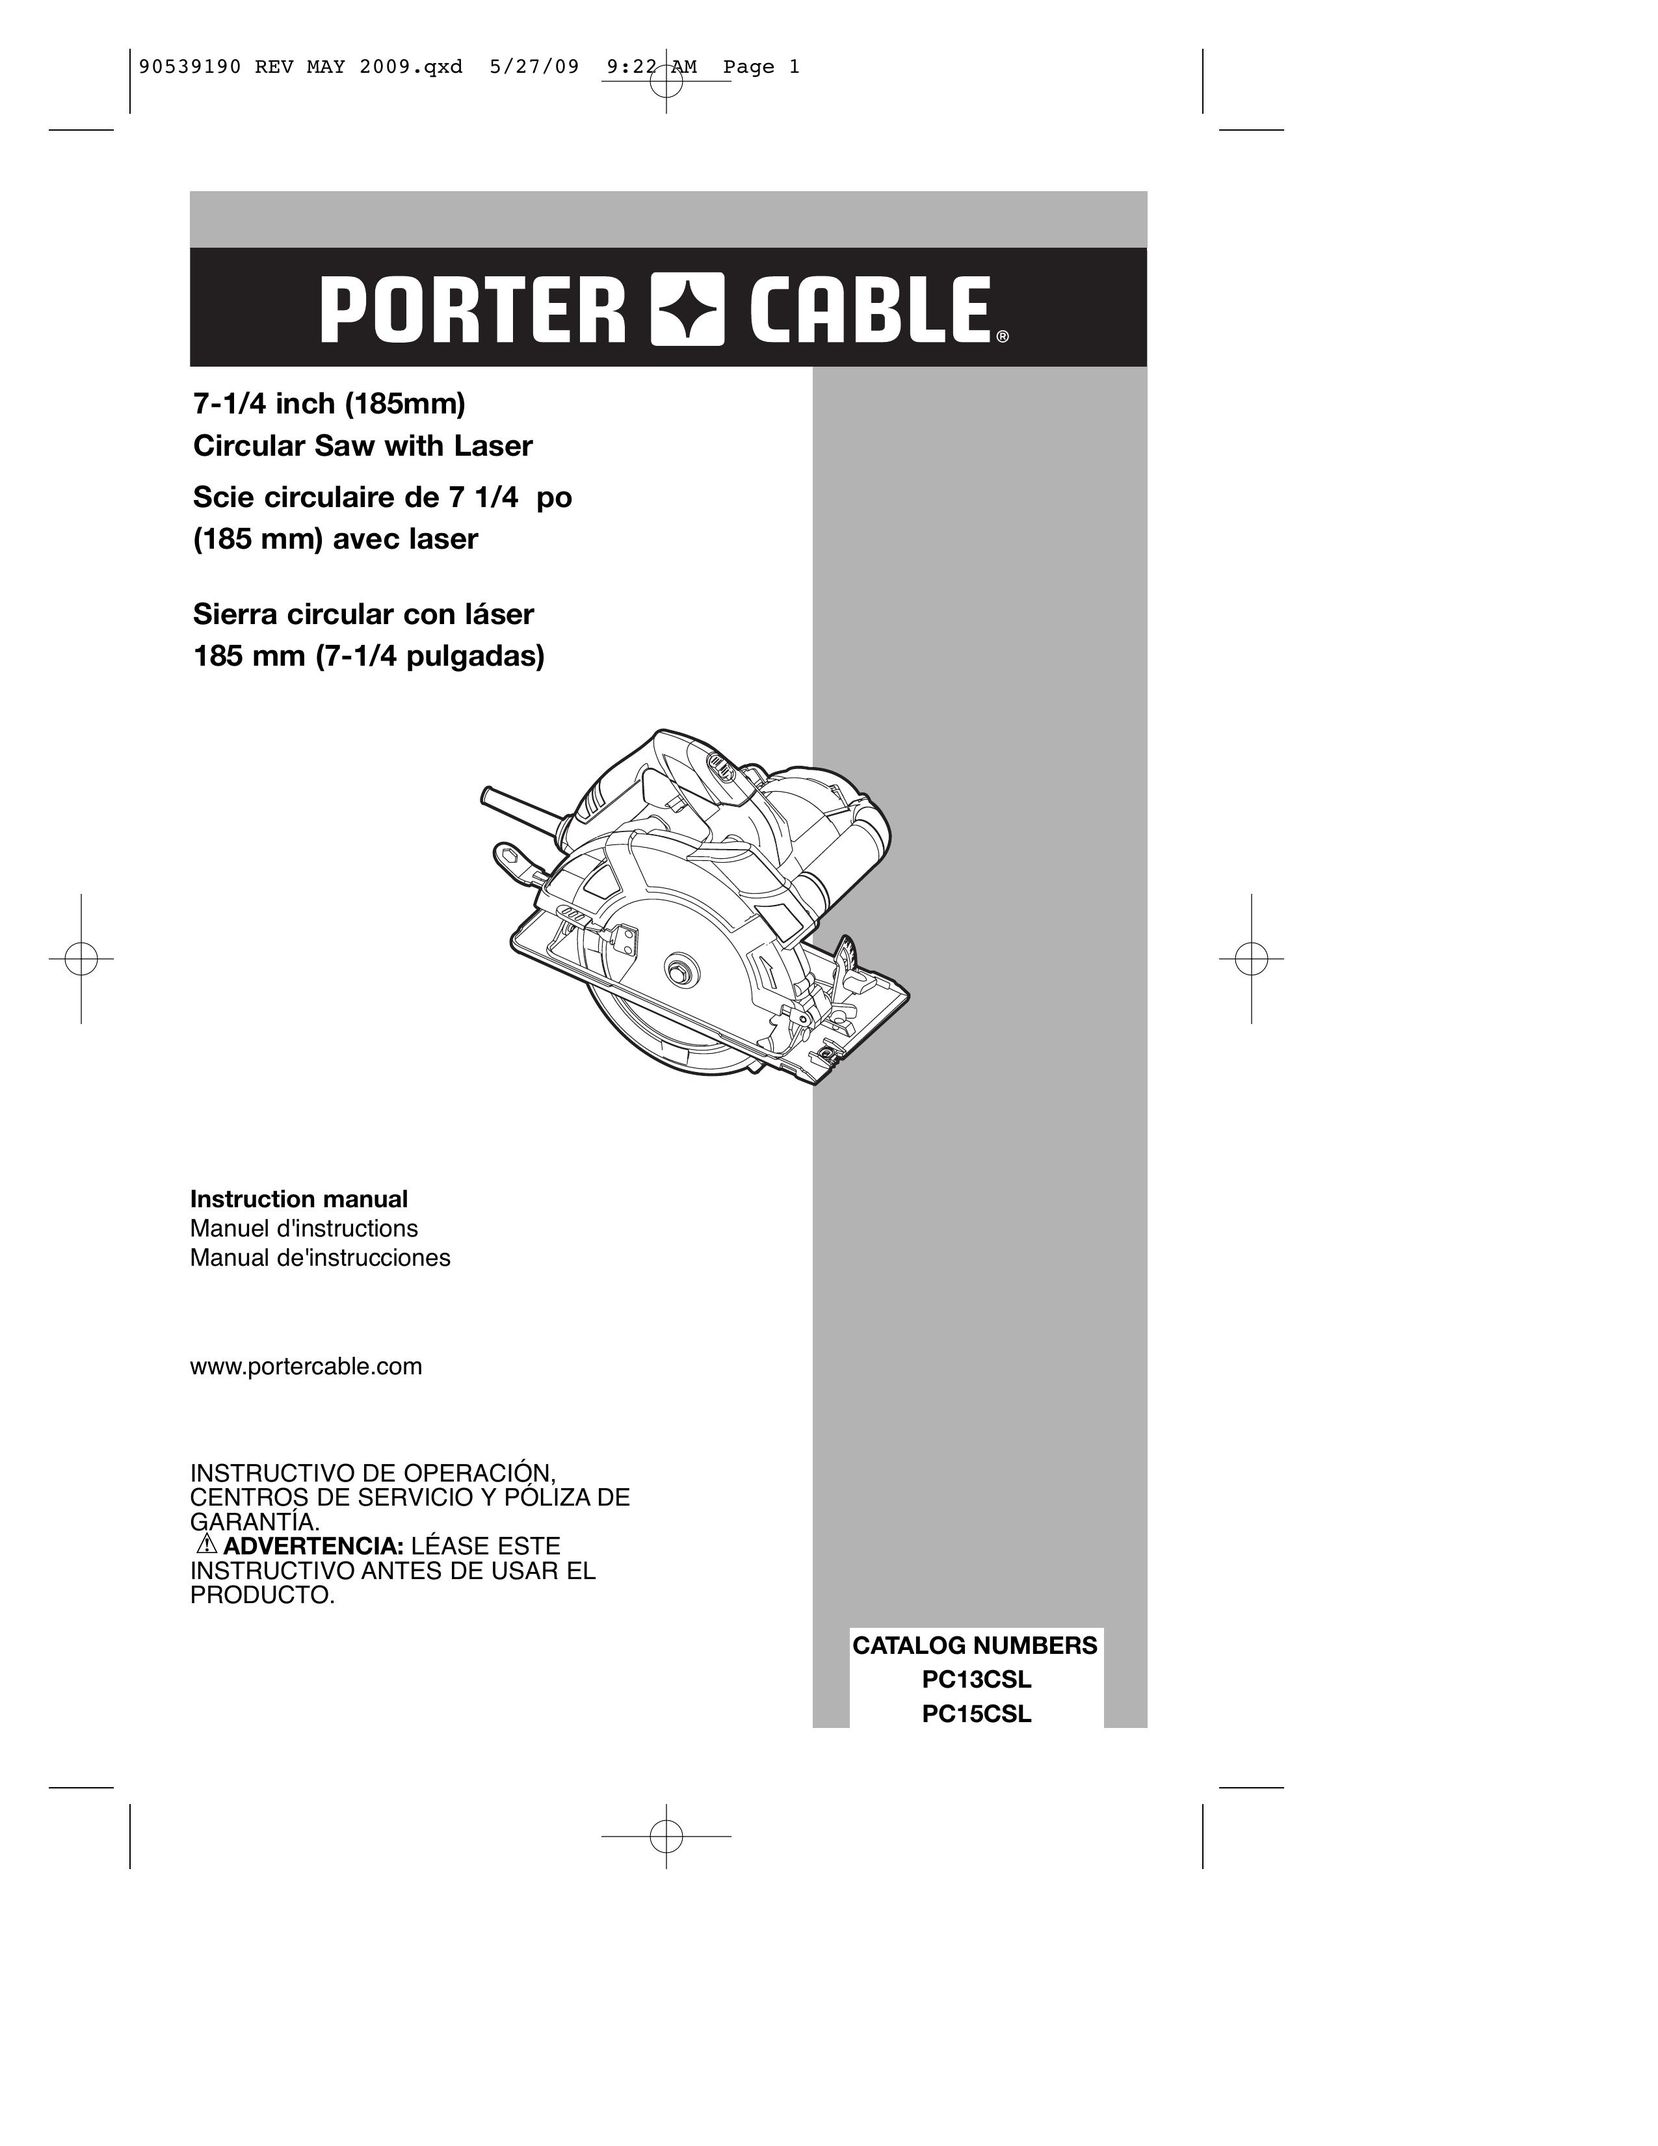 Porter-Cable PC15CLS Cordless Saw User Manual